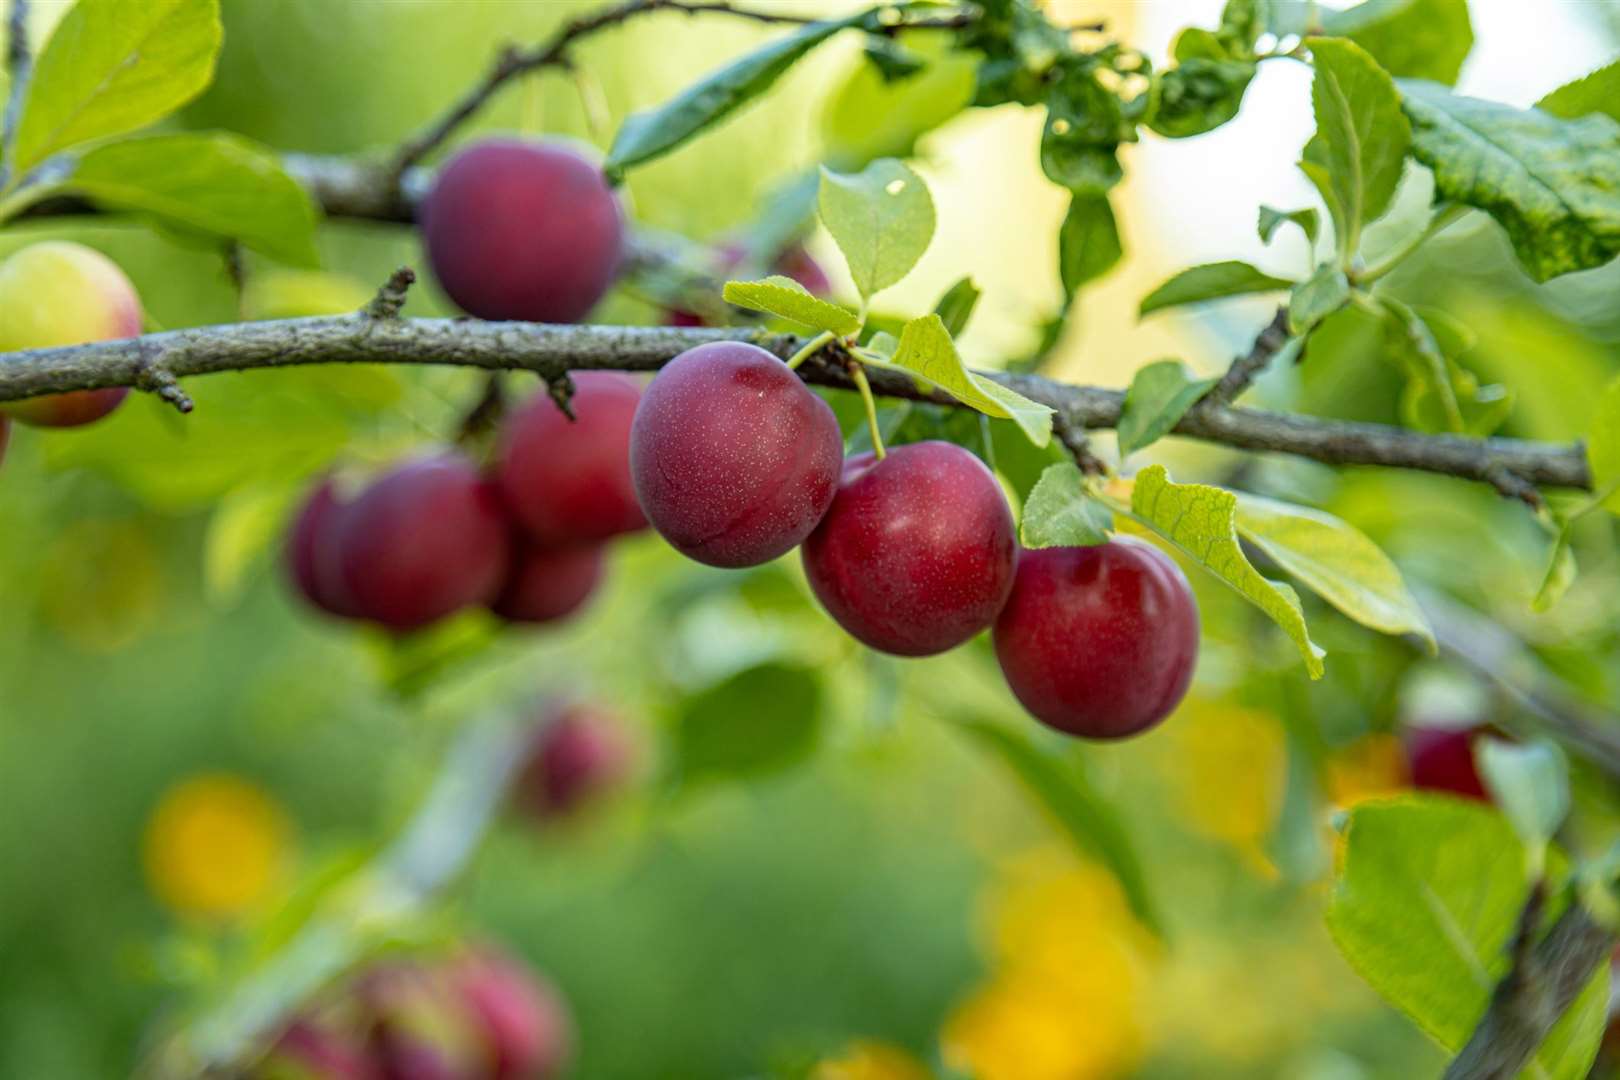 There is a huge variety of plums in different shades of reds and purples at Brogdale. Picture: iStock